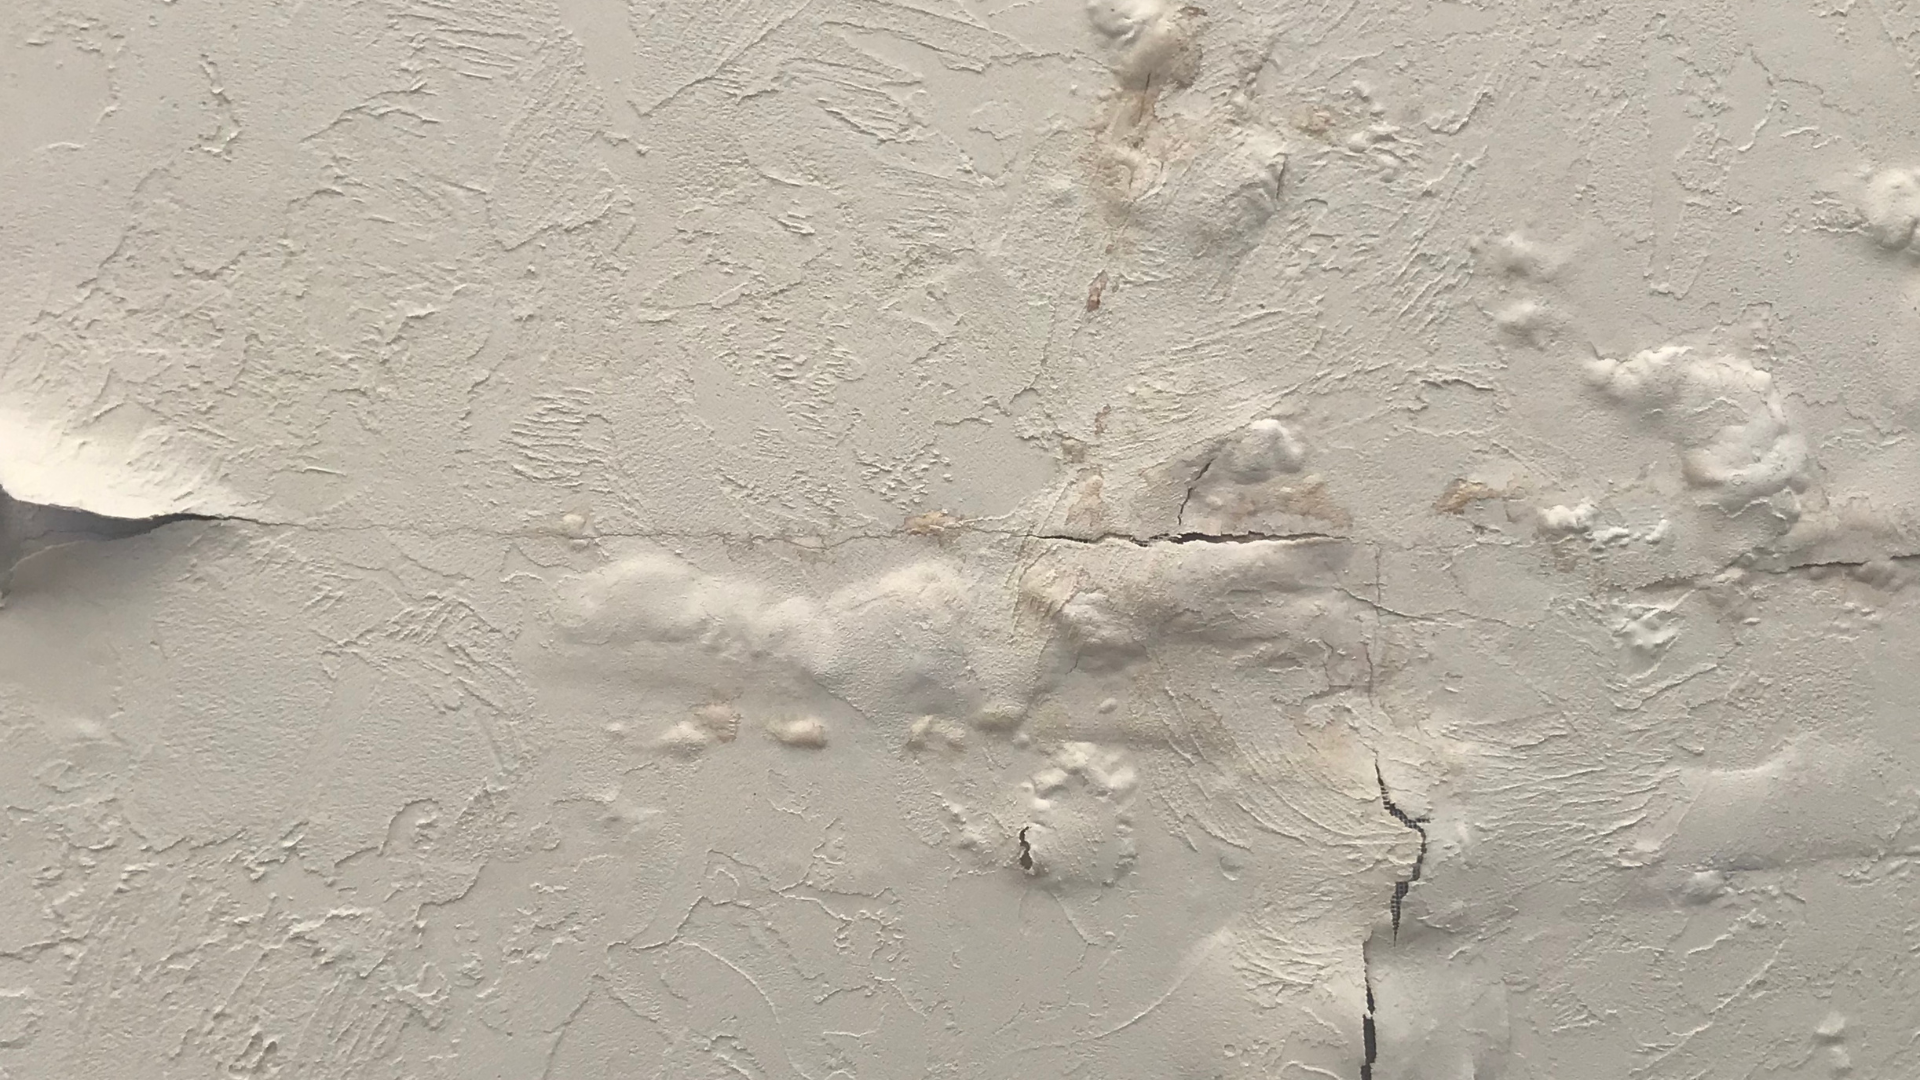 How to Repair a Water-Damaged Wall in the Bathroom